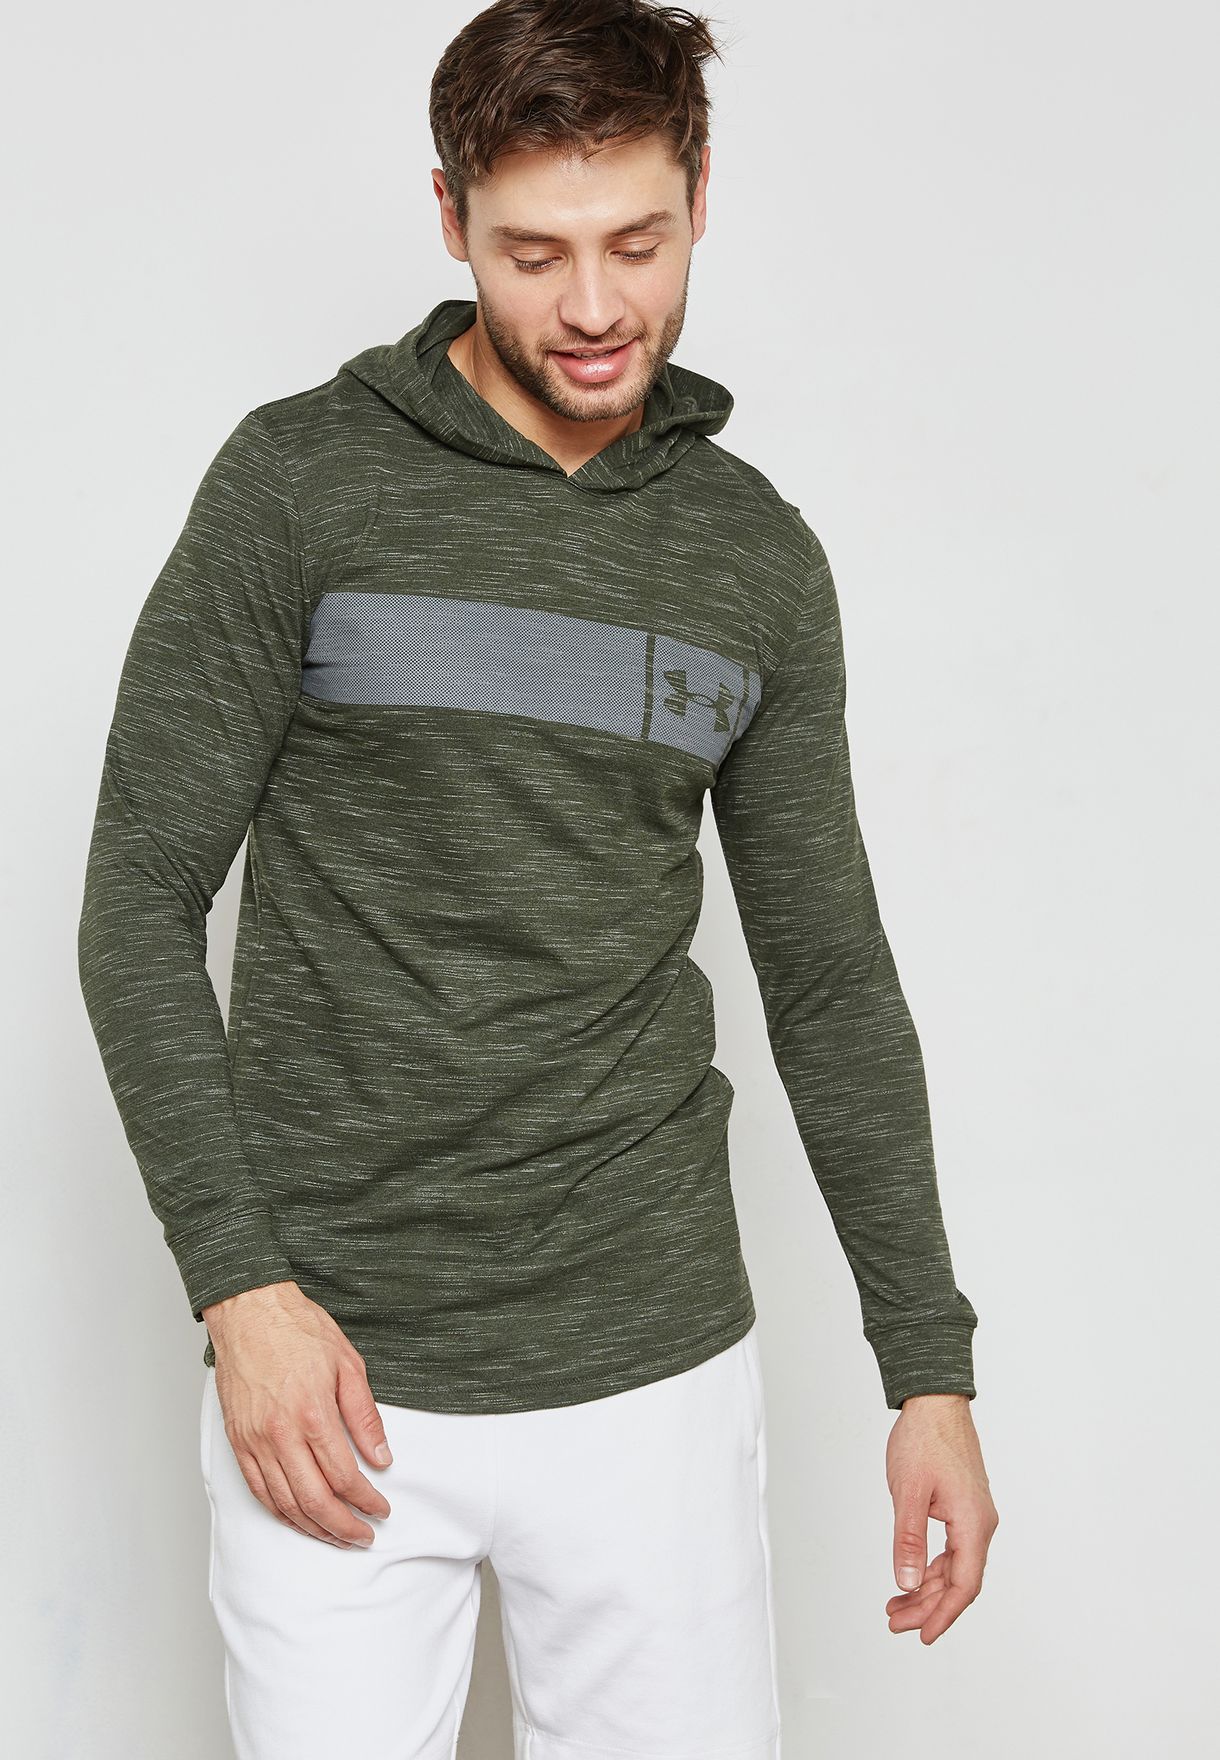 champion hoodie outfit men